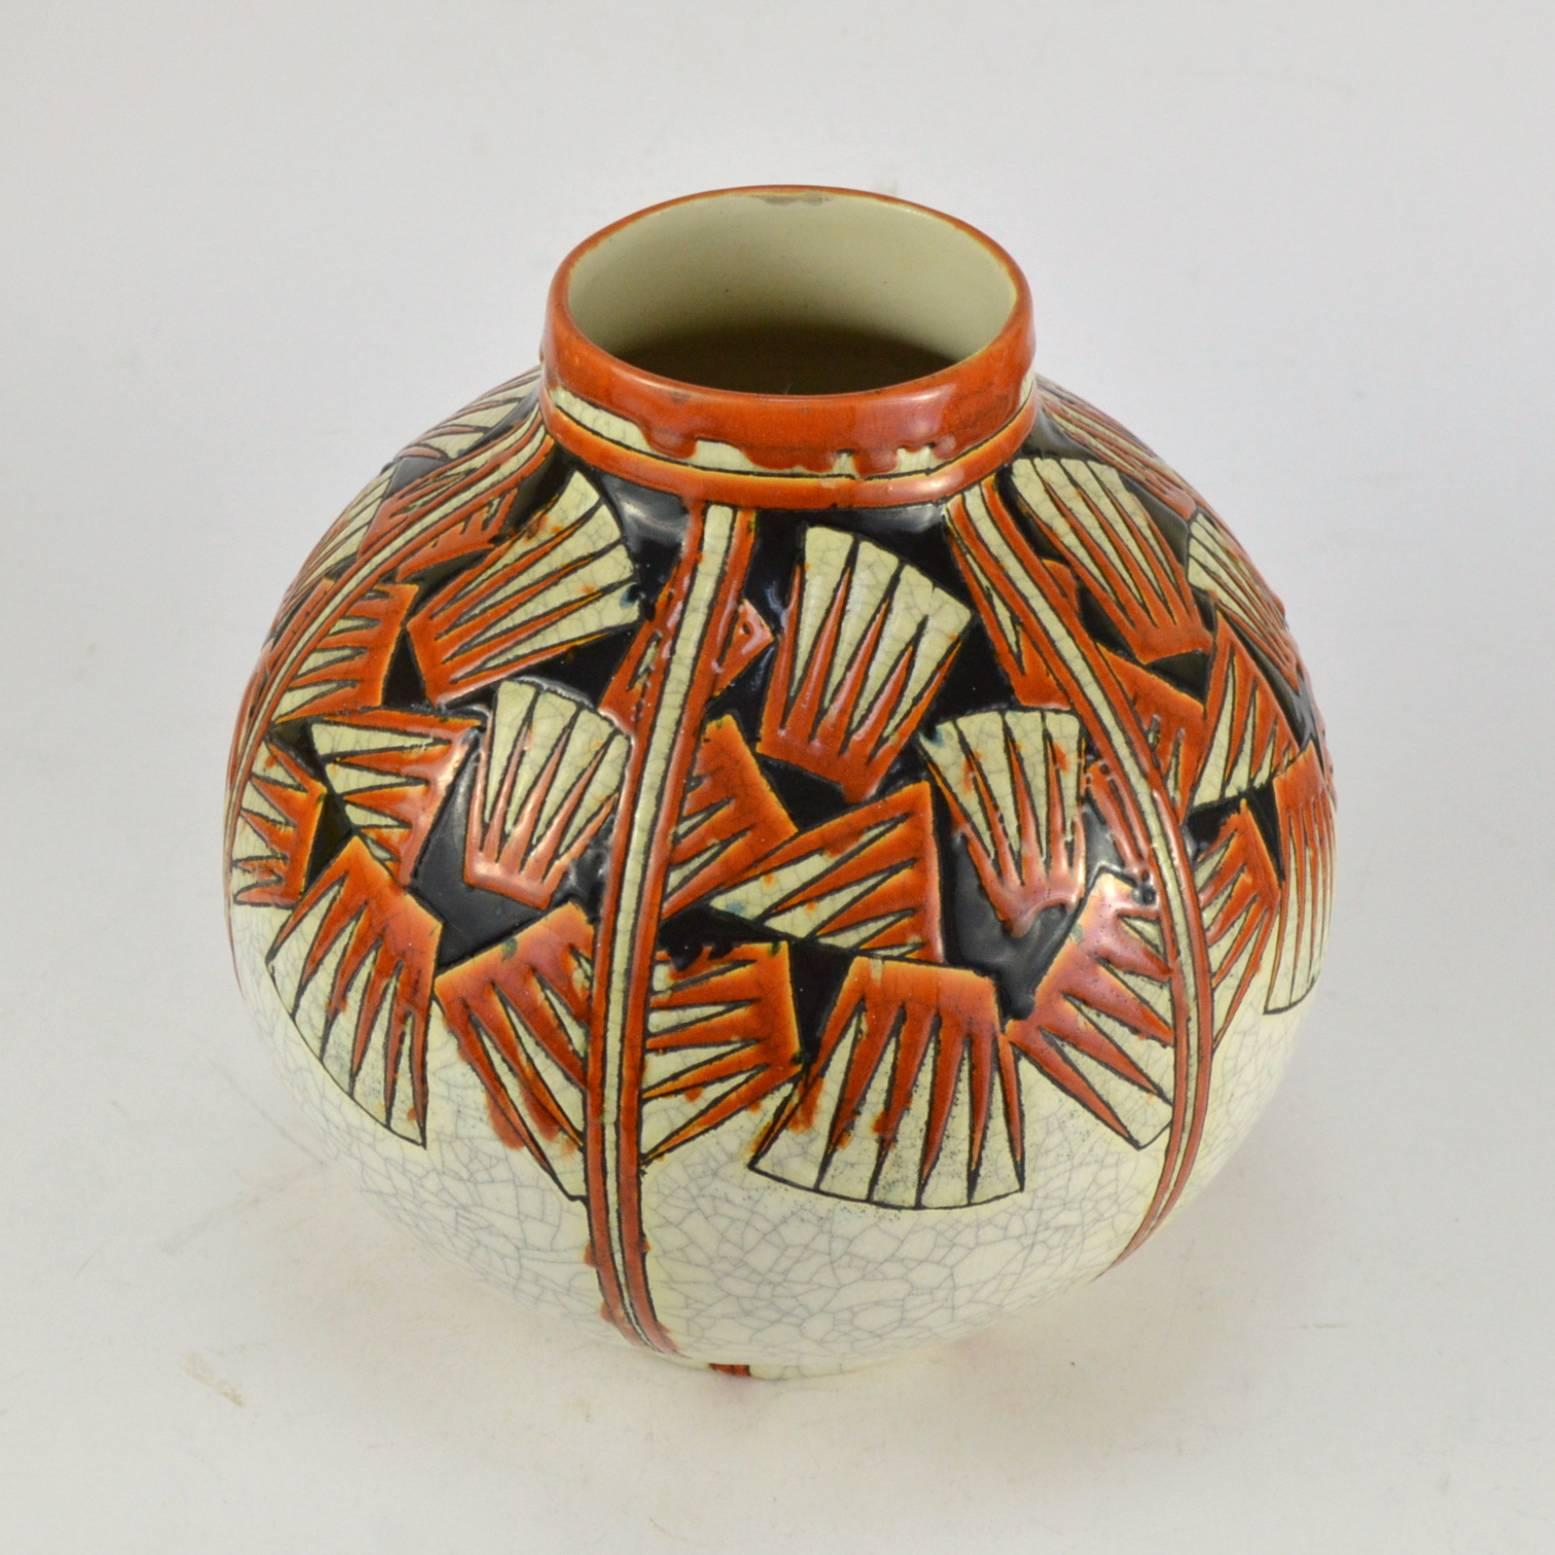 Early 20th Century Charles Catteau Faience Ceramic and Polychrome Enamels Vase Keramis